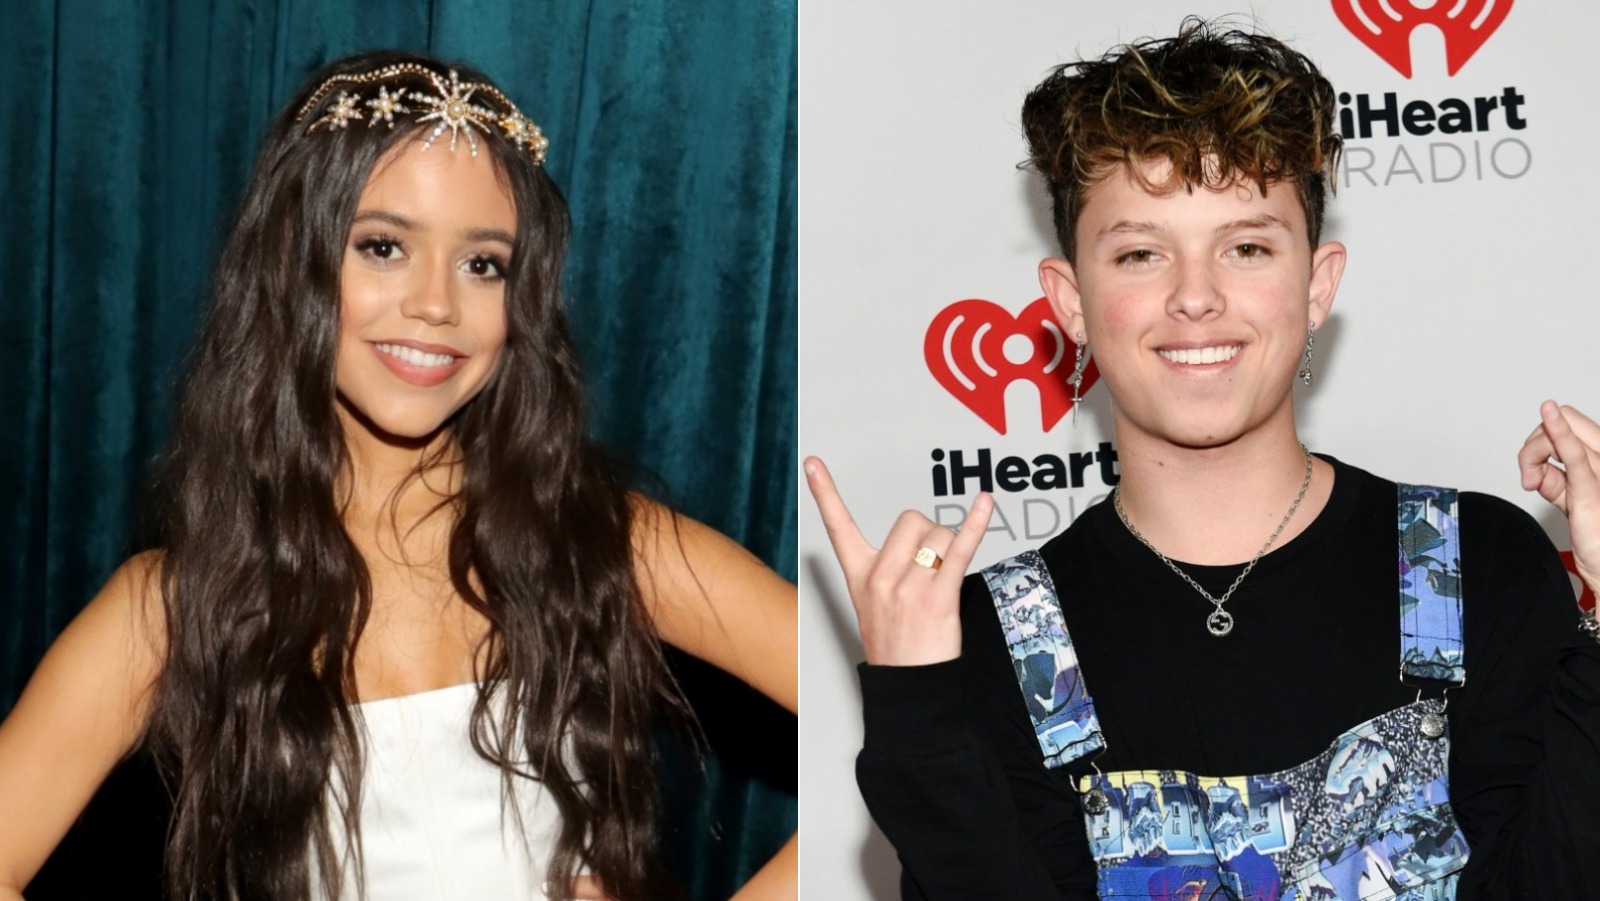 The Truth About The Jacob Sartorius And Jenna Ortega Dating Rumors